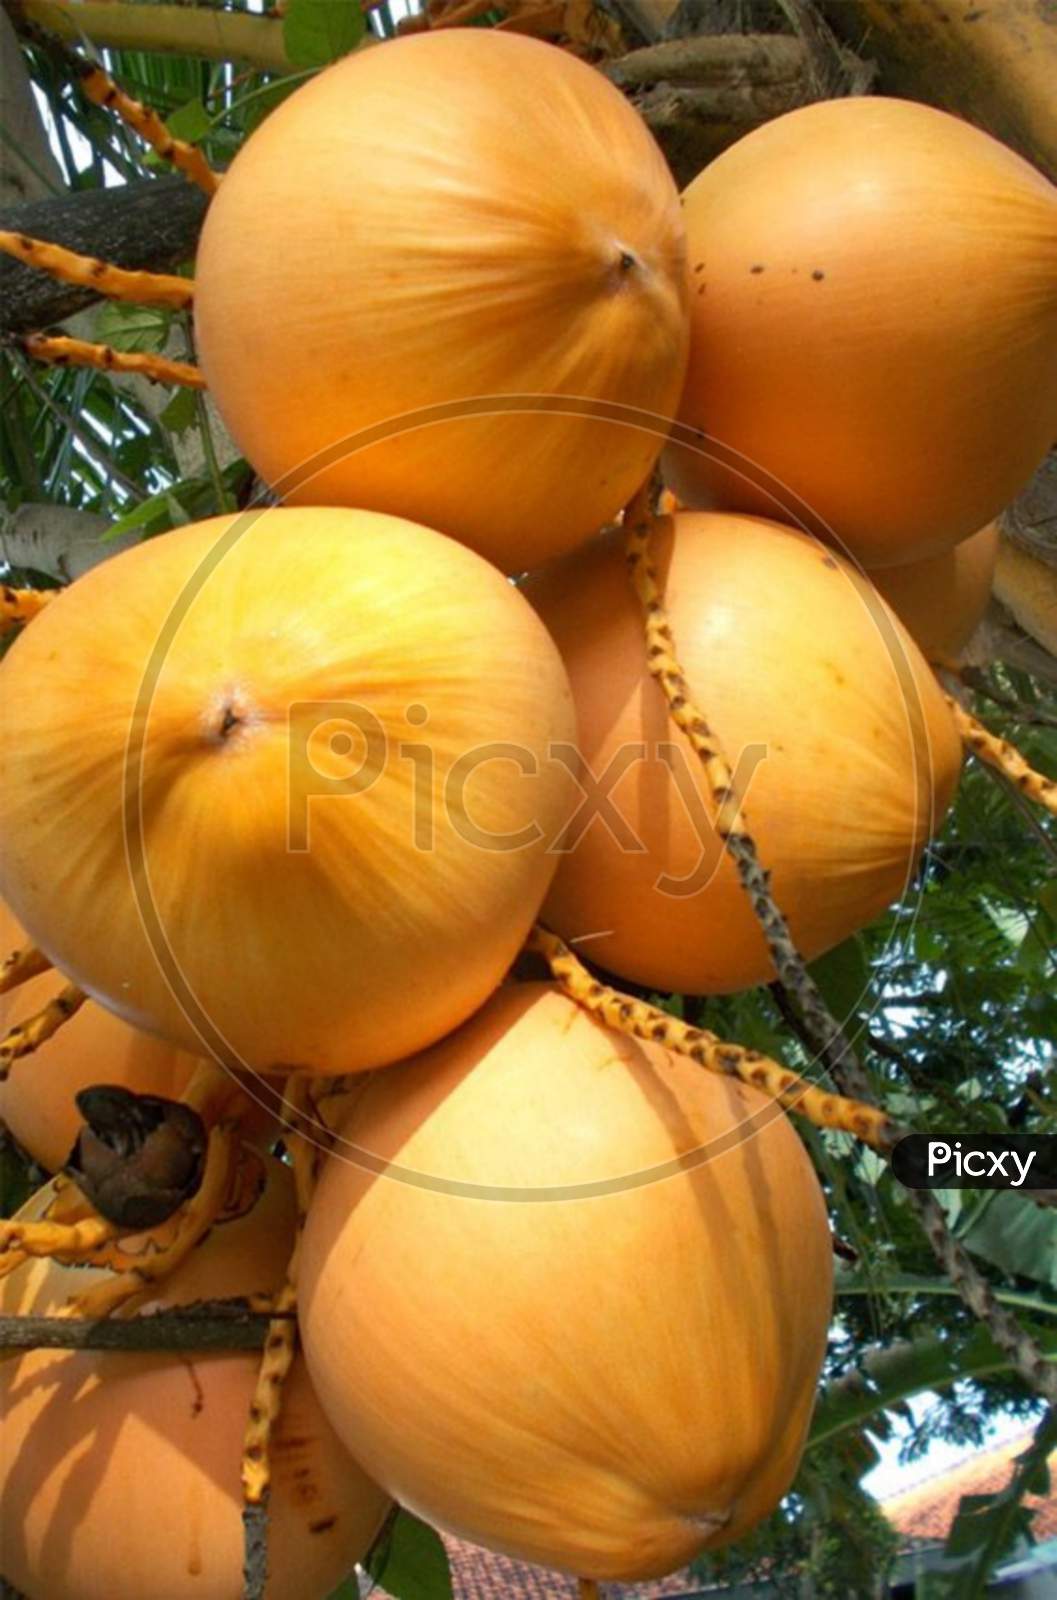 yellow coconut hanging in the tree image jpg photo